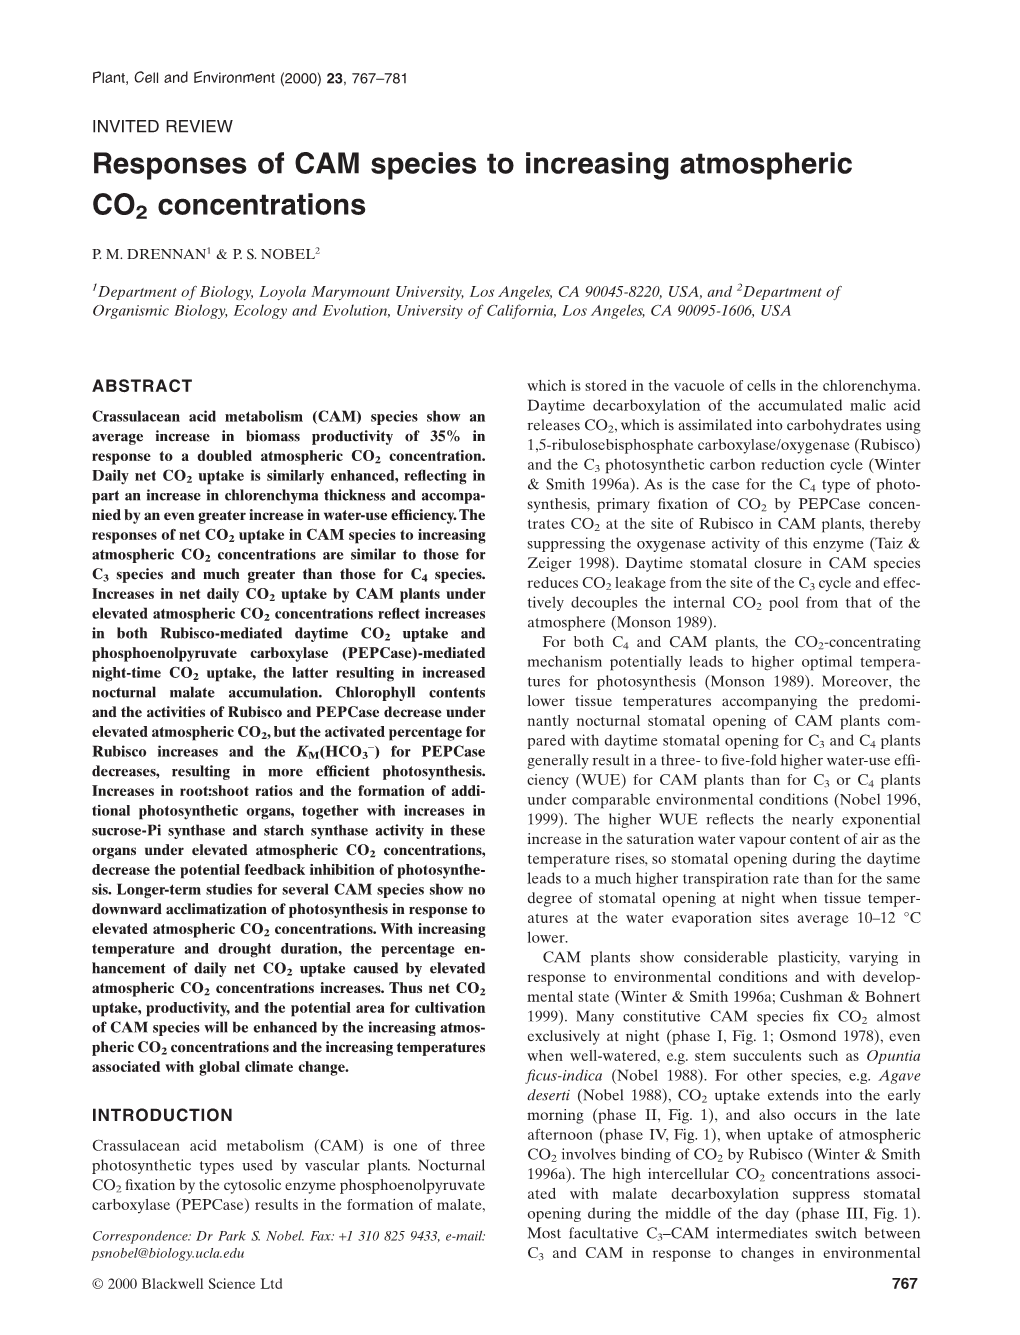 Responses of CAM Species to Increasing Atmospheric CO2 Concentrations